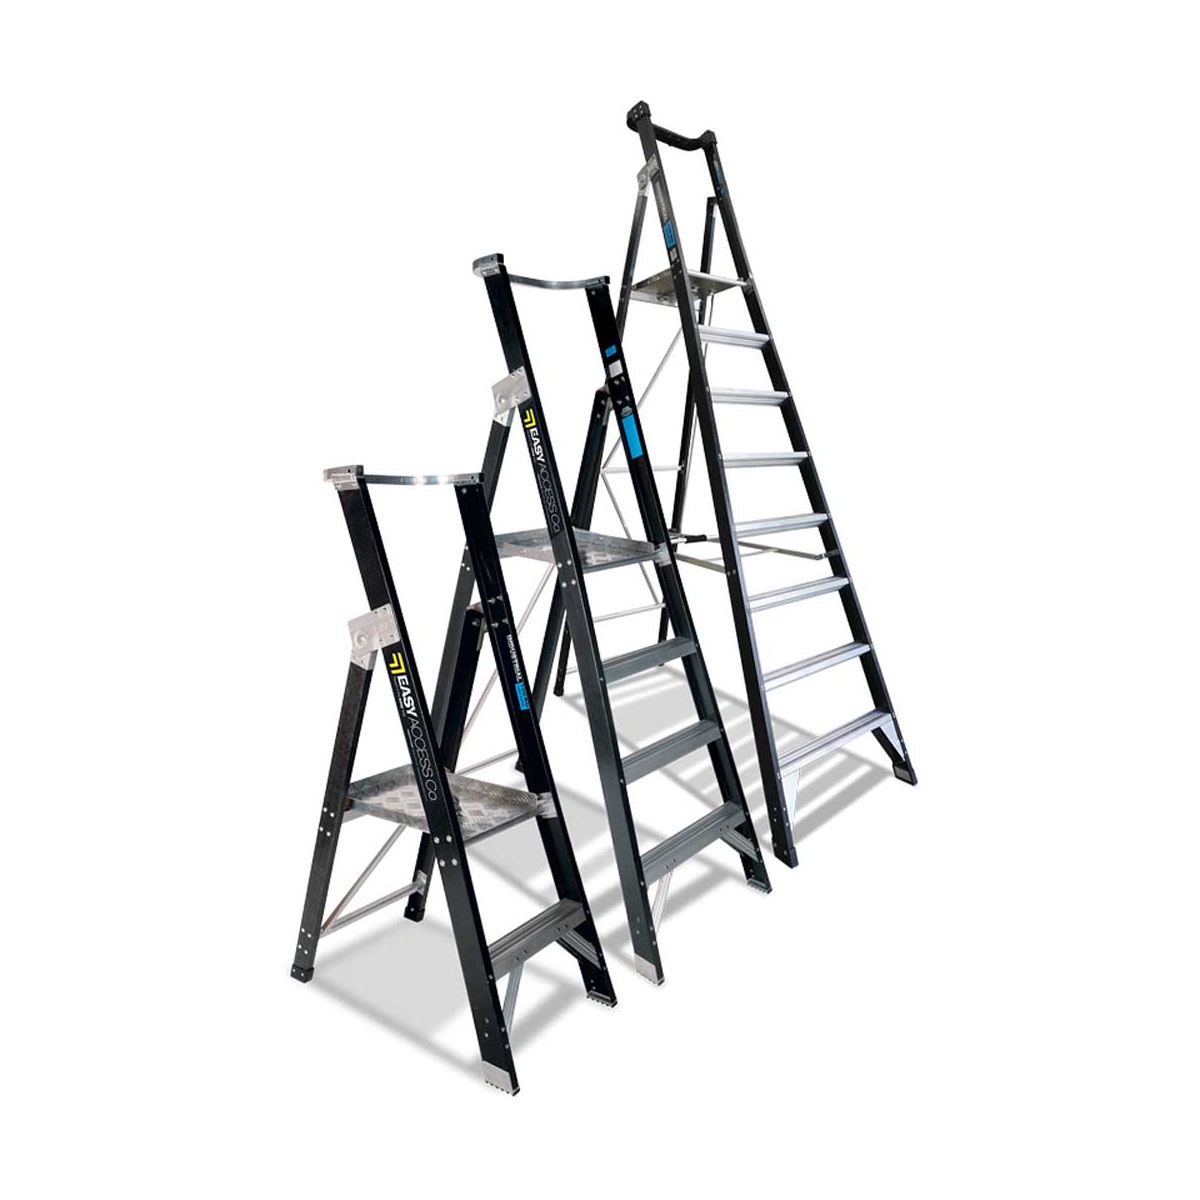 Best Platform Ladders NZ Offers for Industrial Use